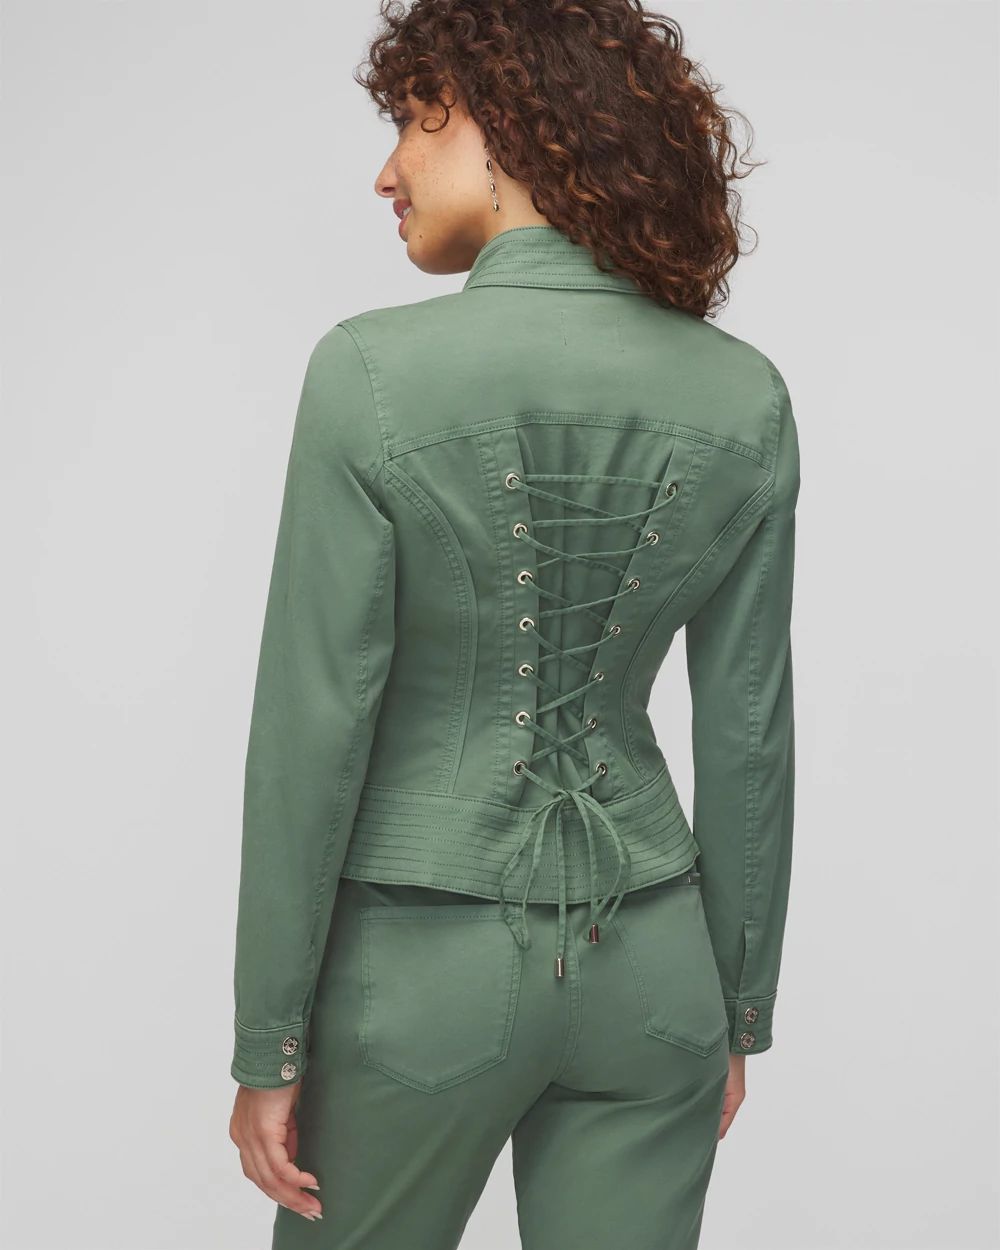 Pret Lace-Up Back Casual Jacket click to view larger image.